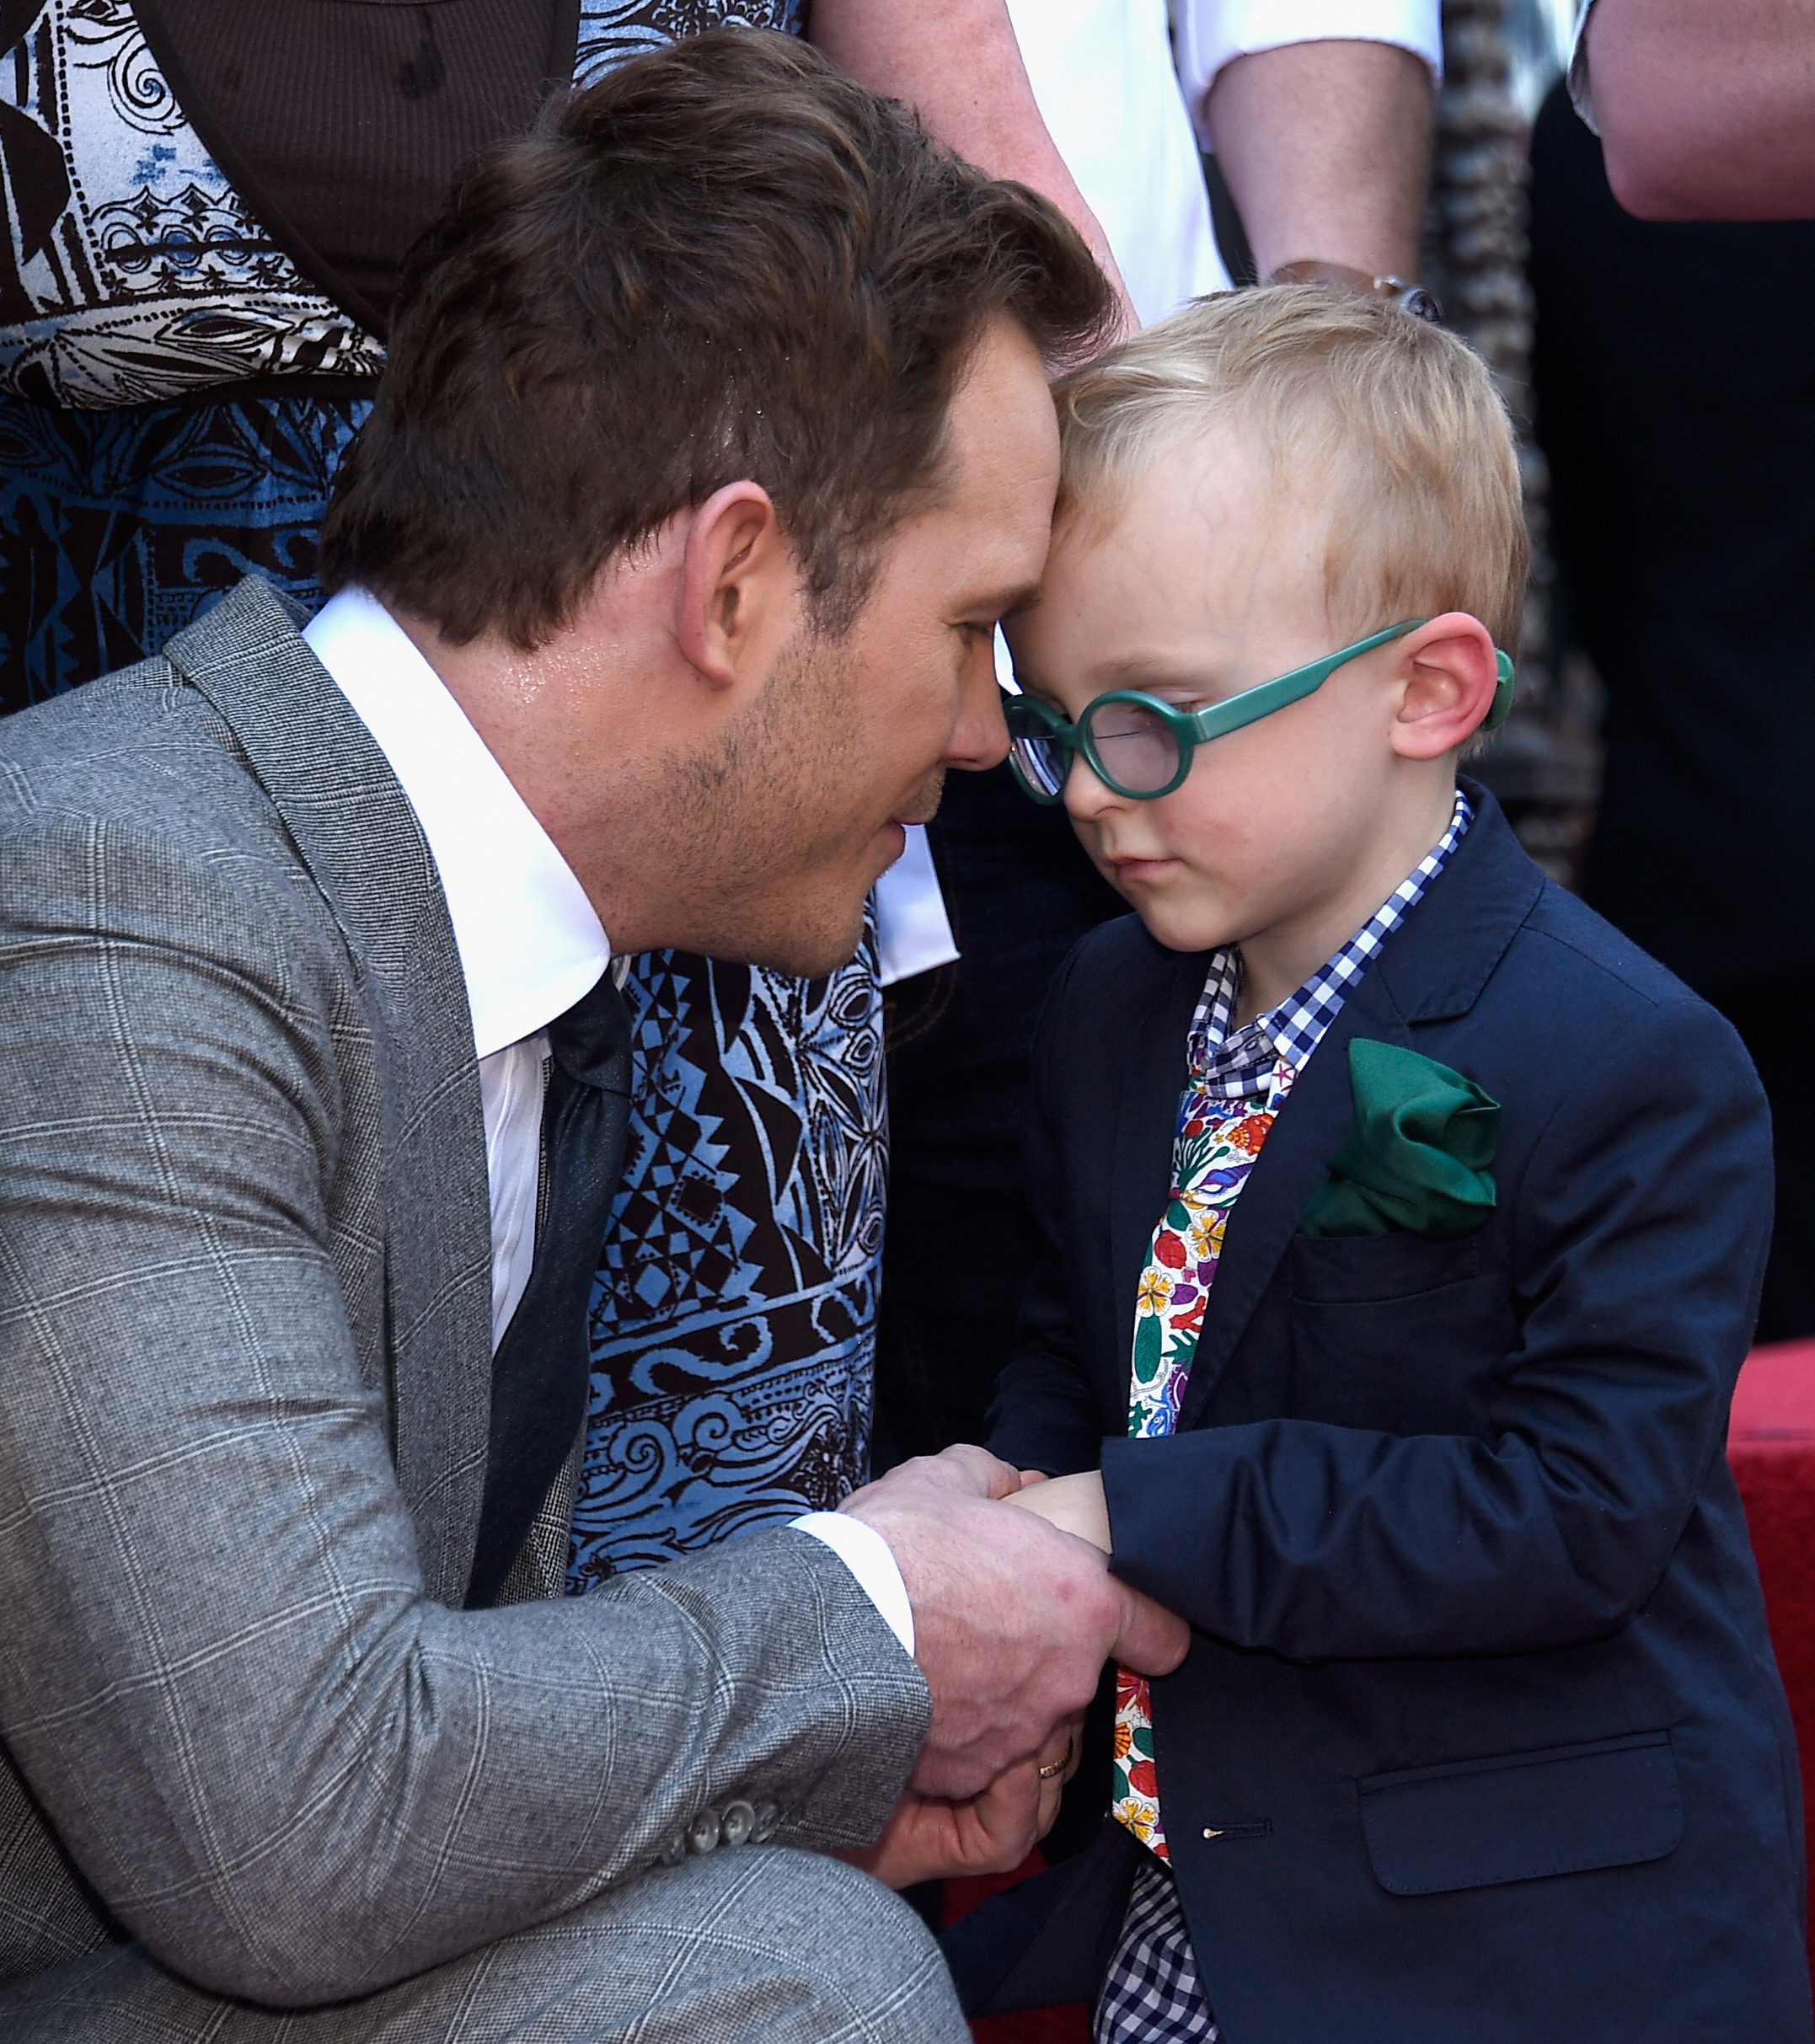 Chris Pratt and Jack Pratt at Chris Pratt honored with Star on the Hollywood Walk Of Fame in Hollywood, California on April 21, 2017. | Source: Getty Images